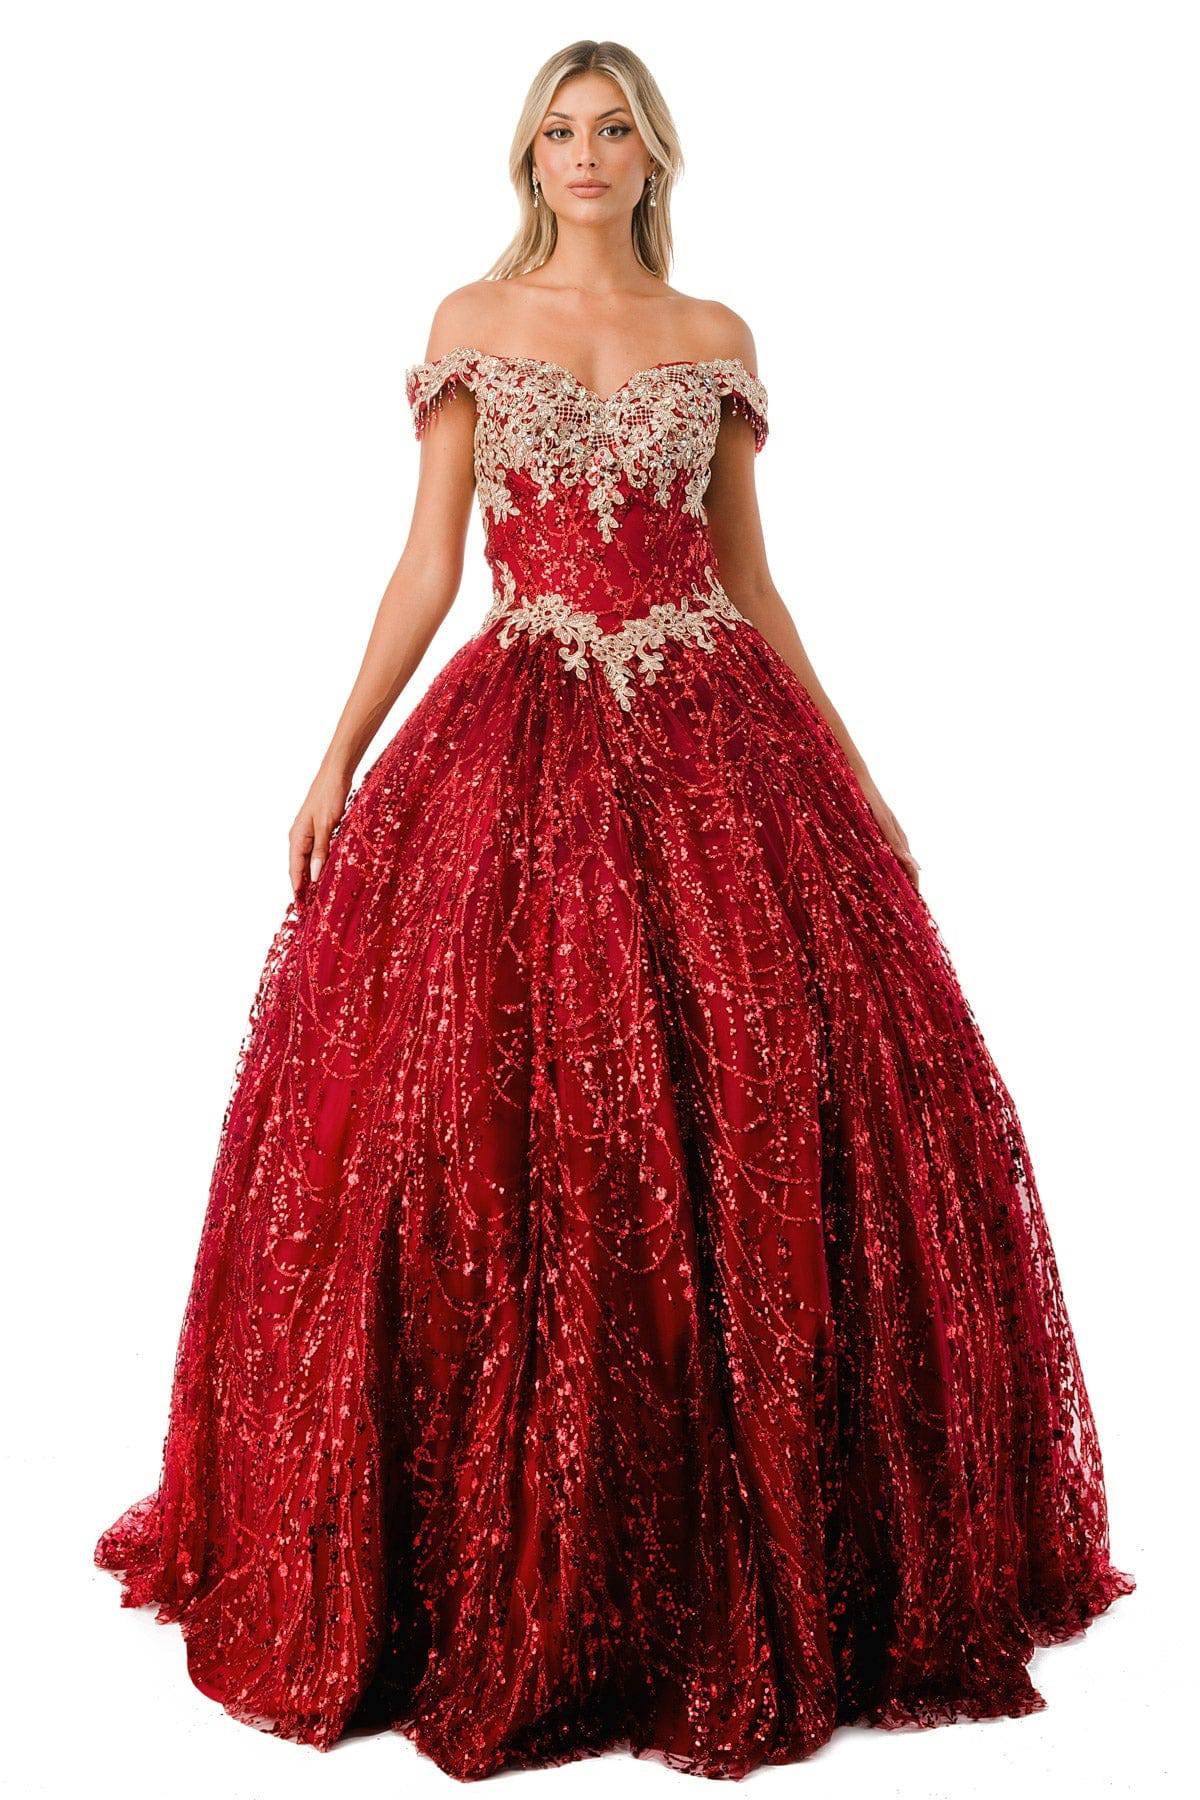 Aspeed L2364 Off Shoulder Lace & Sequin Quinceanera Dress - NORMA REED